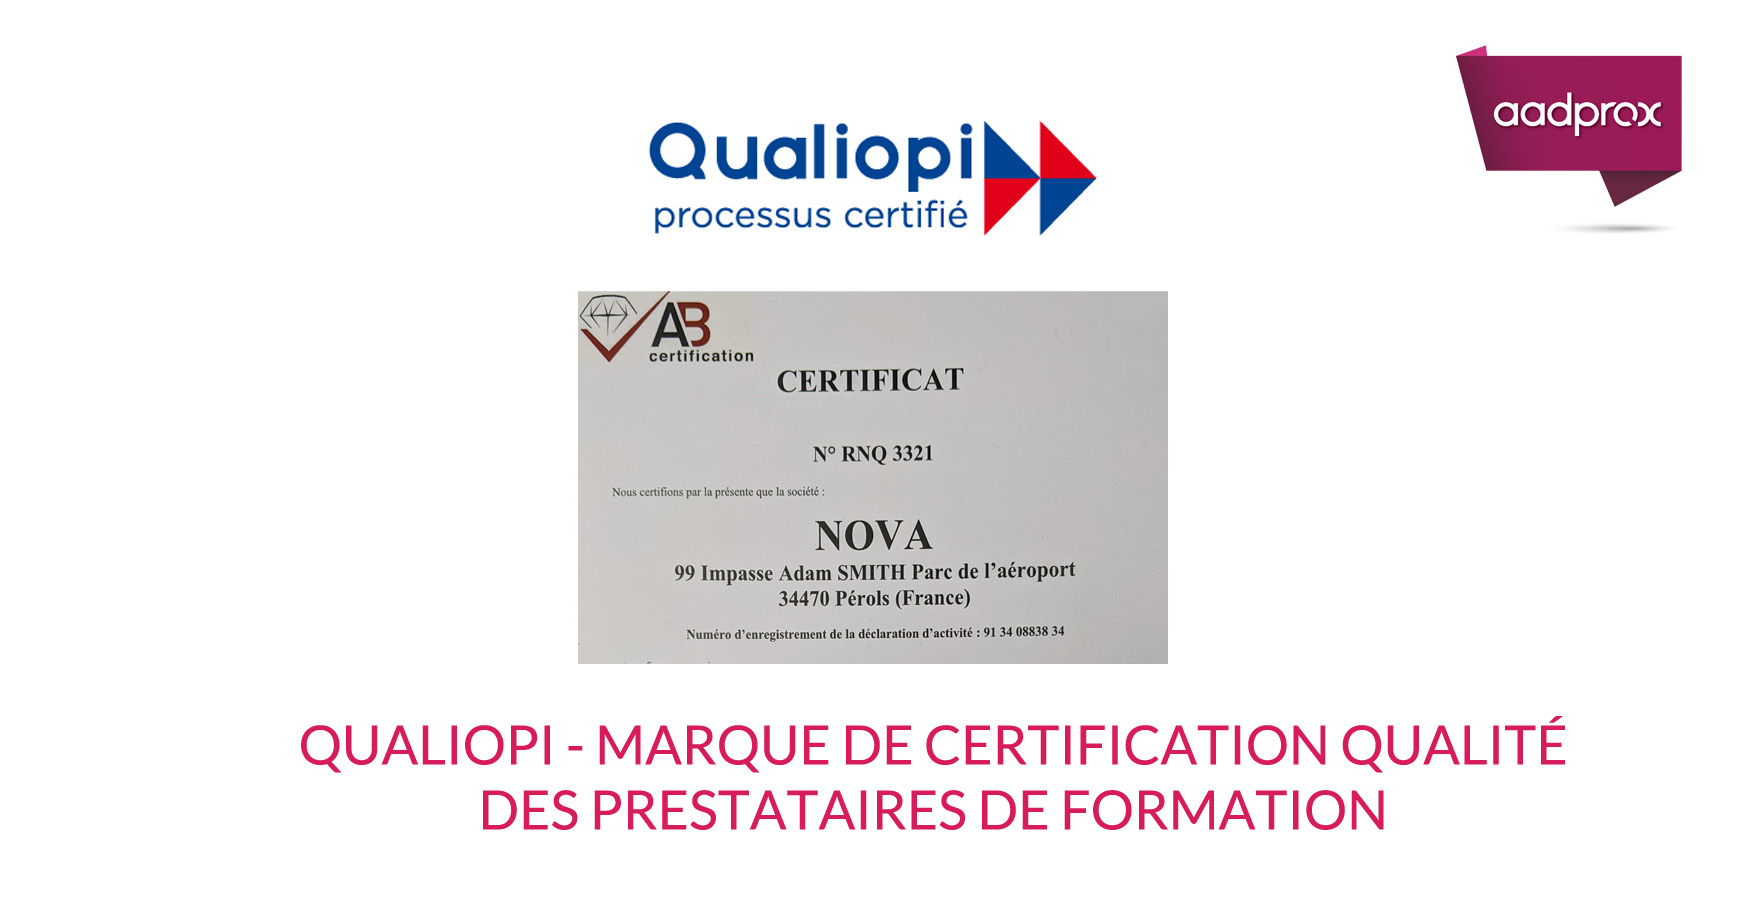 You are currently viewing Notre certification Qualiopi